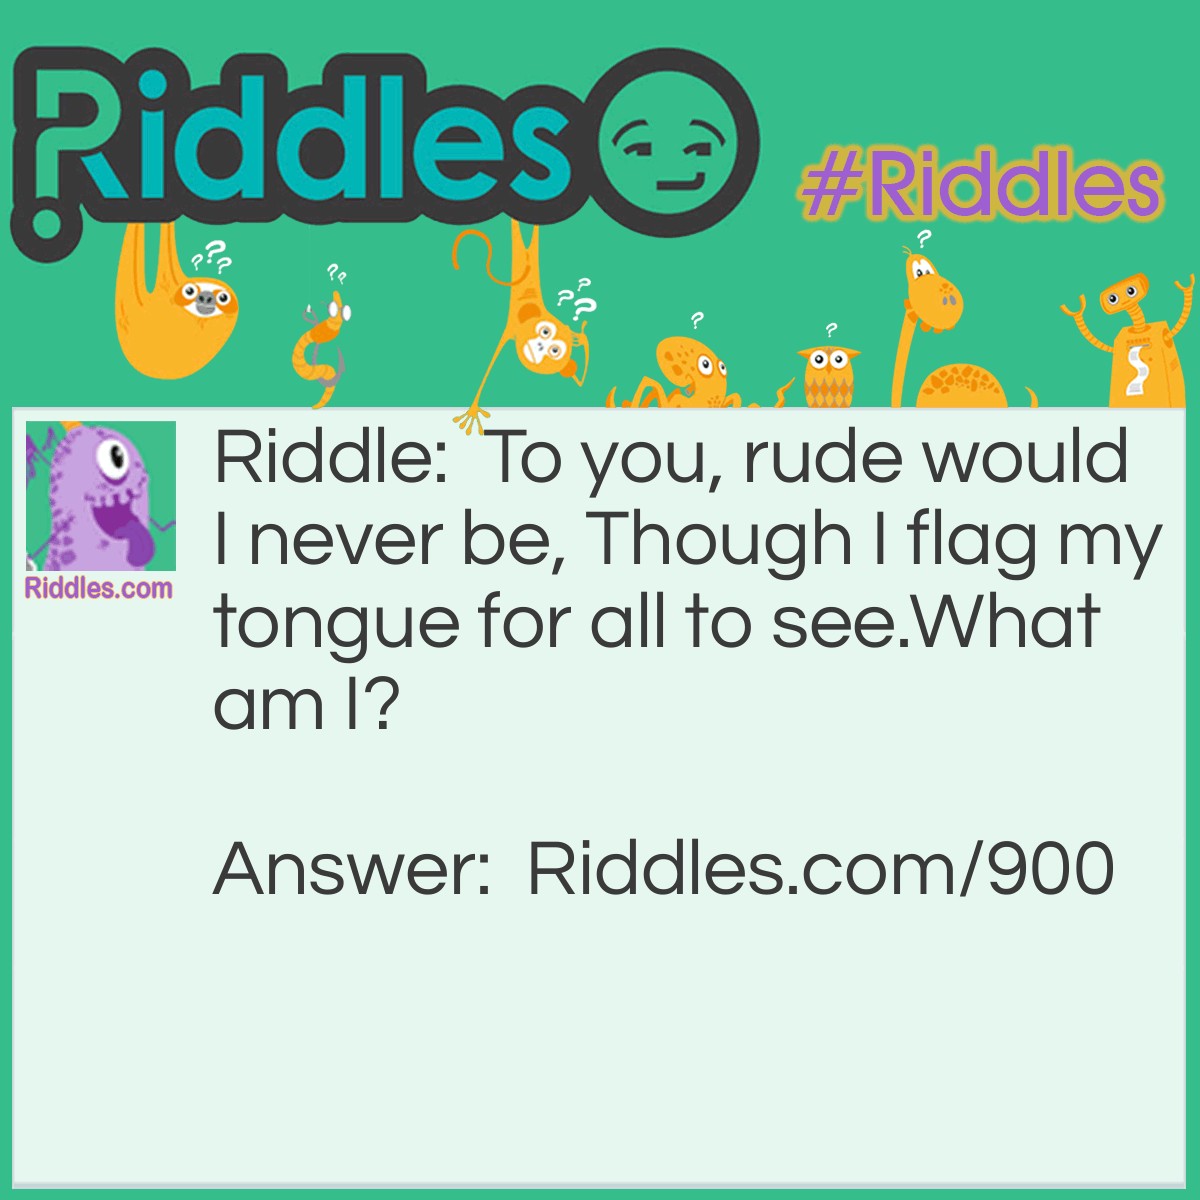 Riddle: To you, rude would I never be, Though I flag my tongue for all to see.
What am I? Answer: A dog!